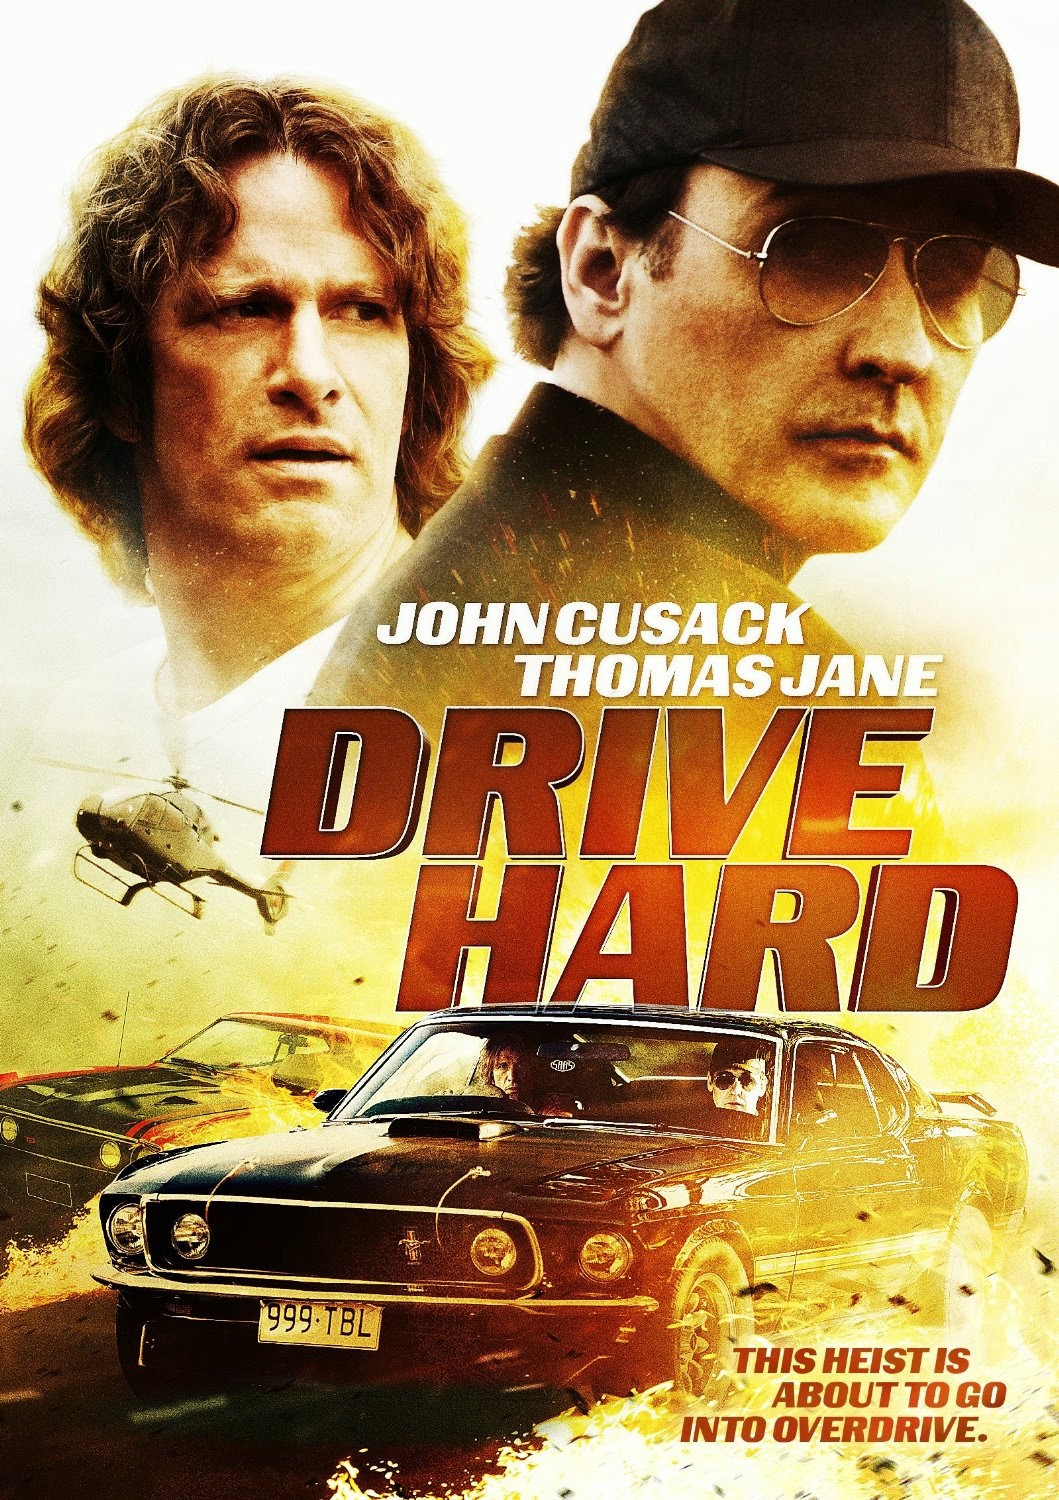 DVD Review - Drive Hard